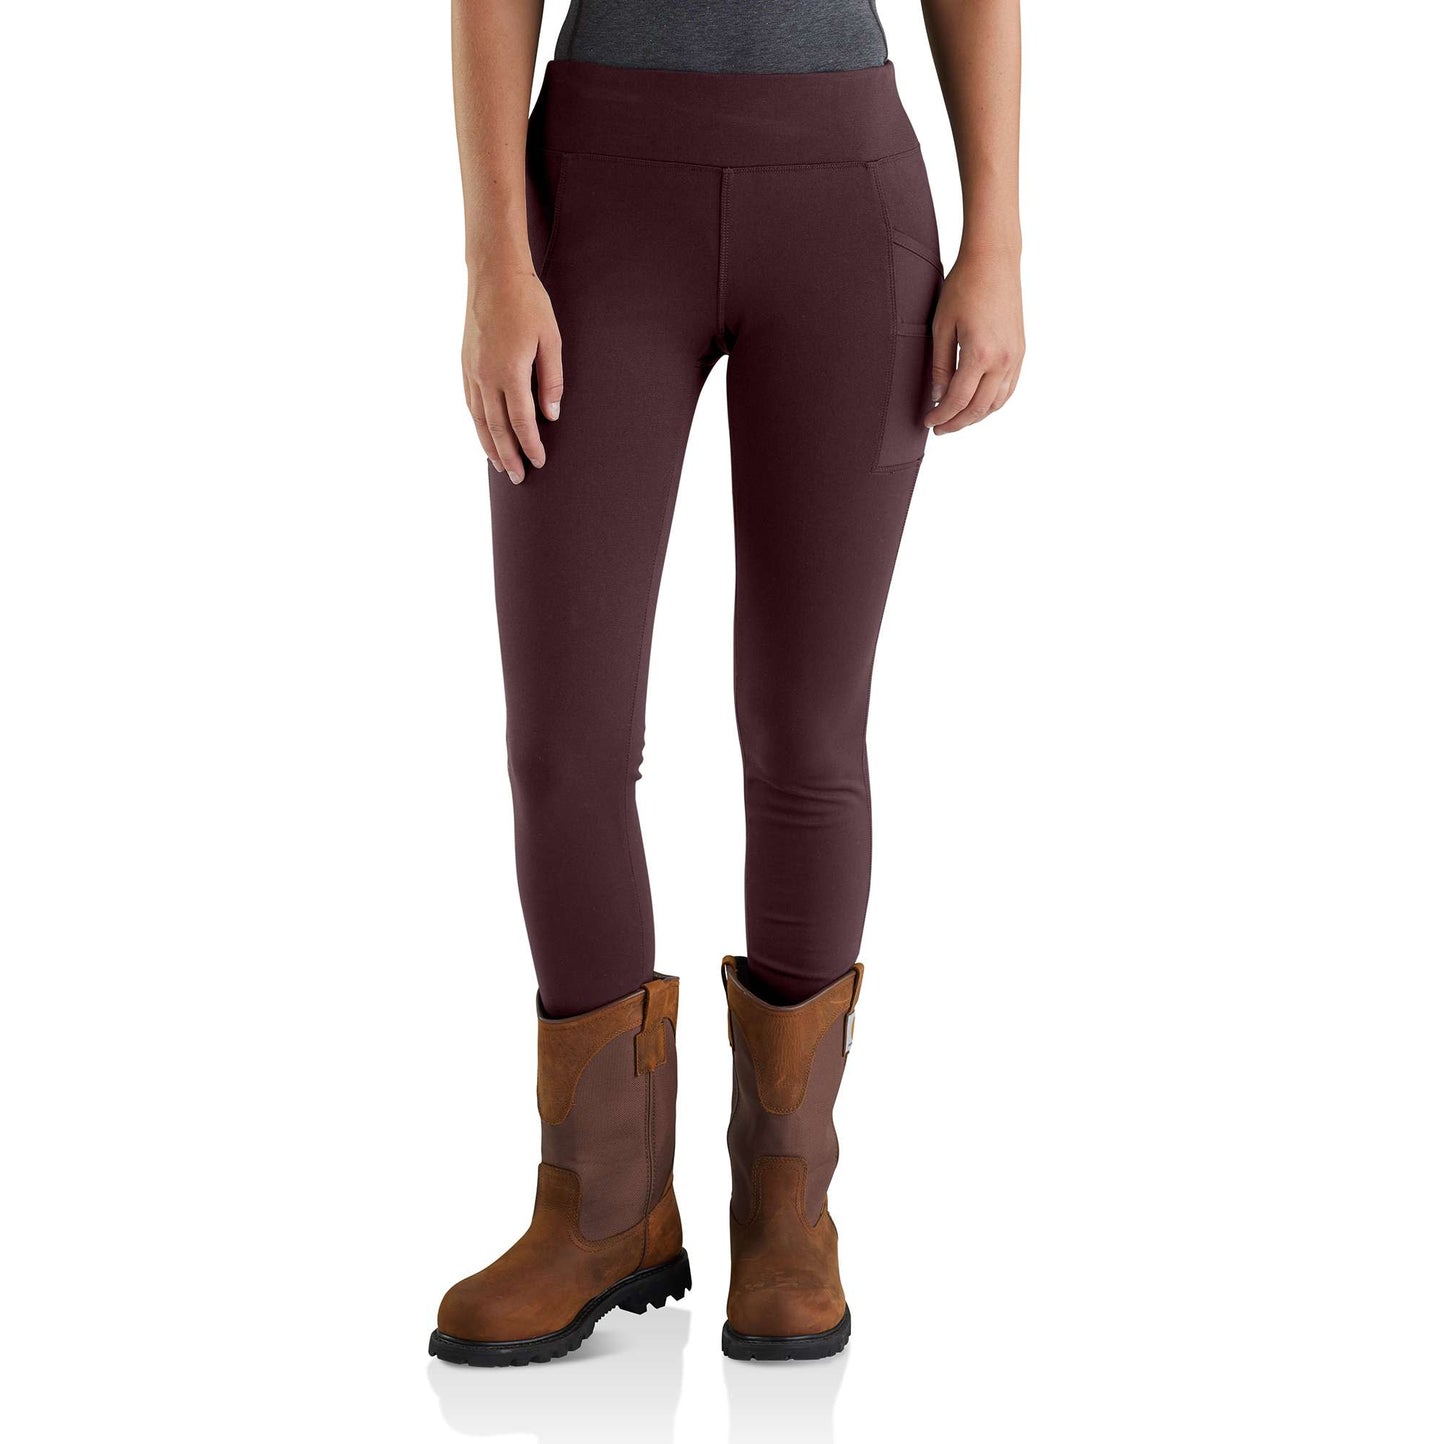 Carhartt Force Fitted Pocket Leggings Women's Small Grey Oyster Color